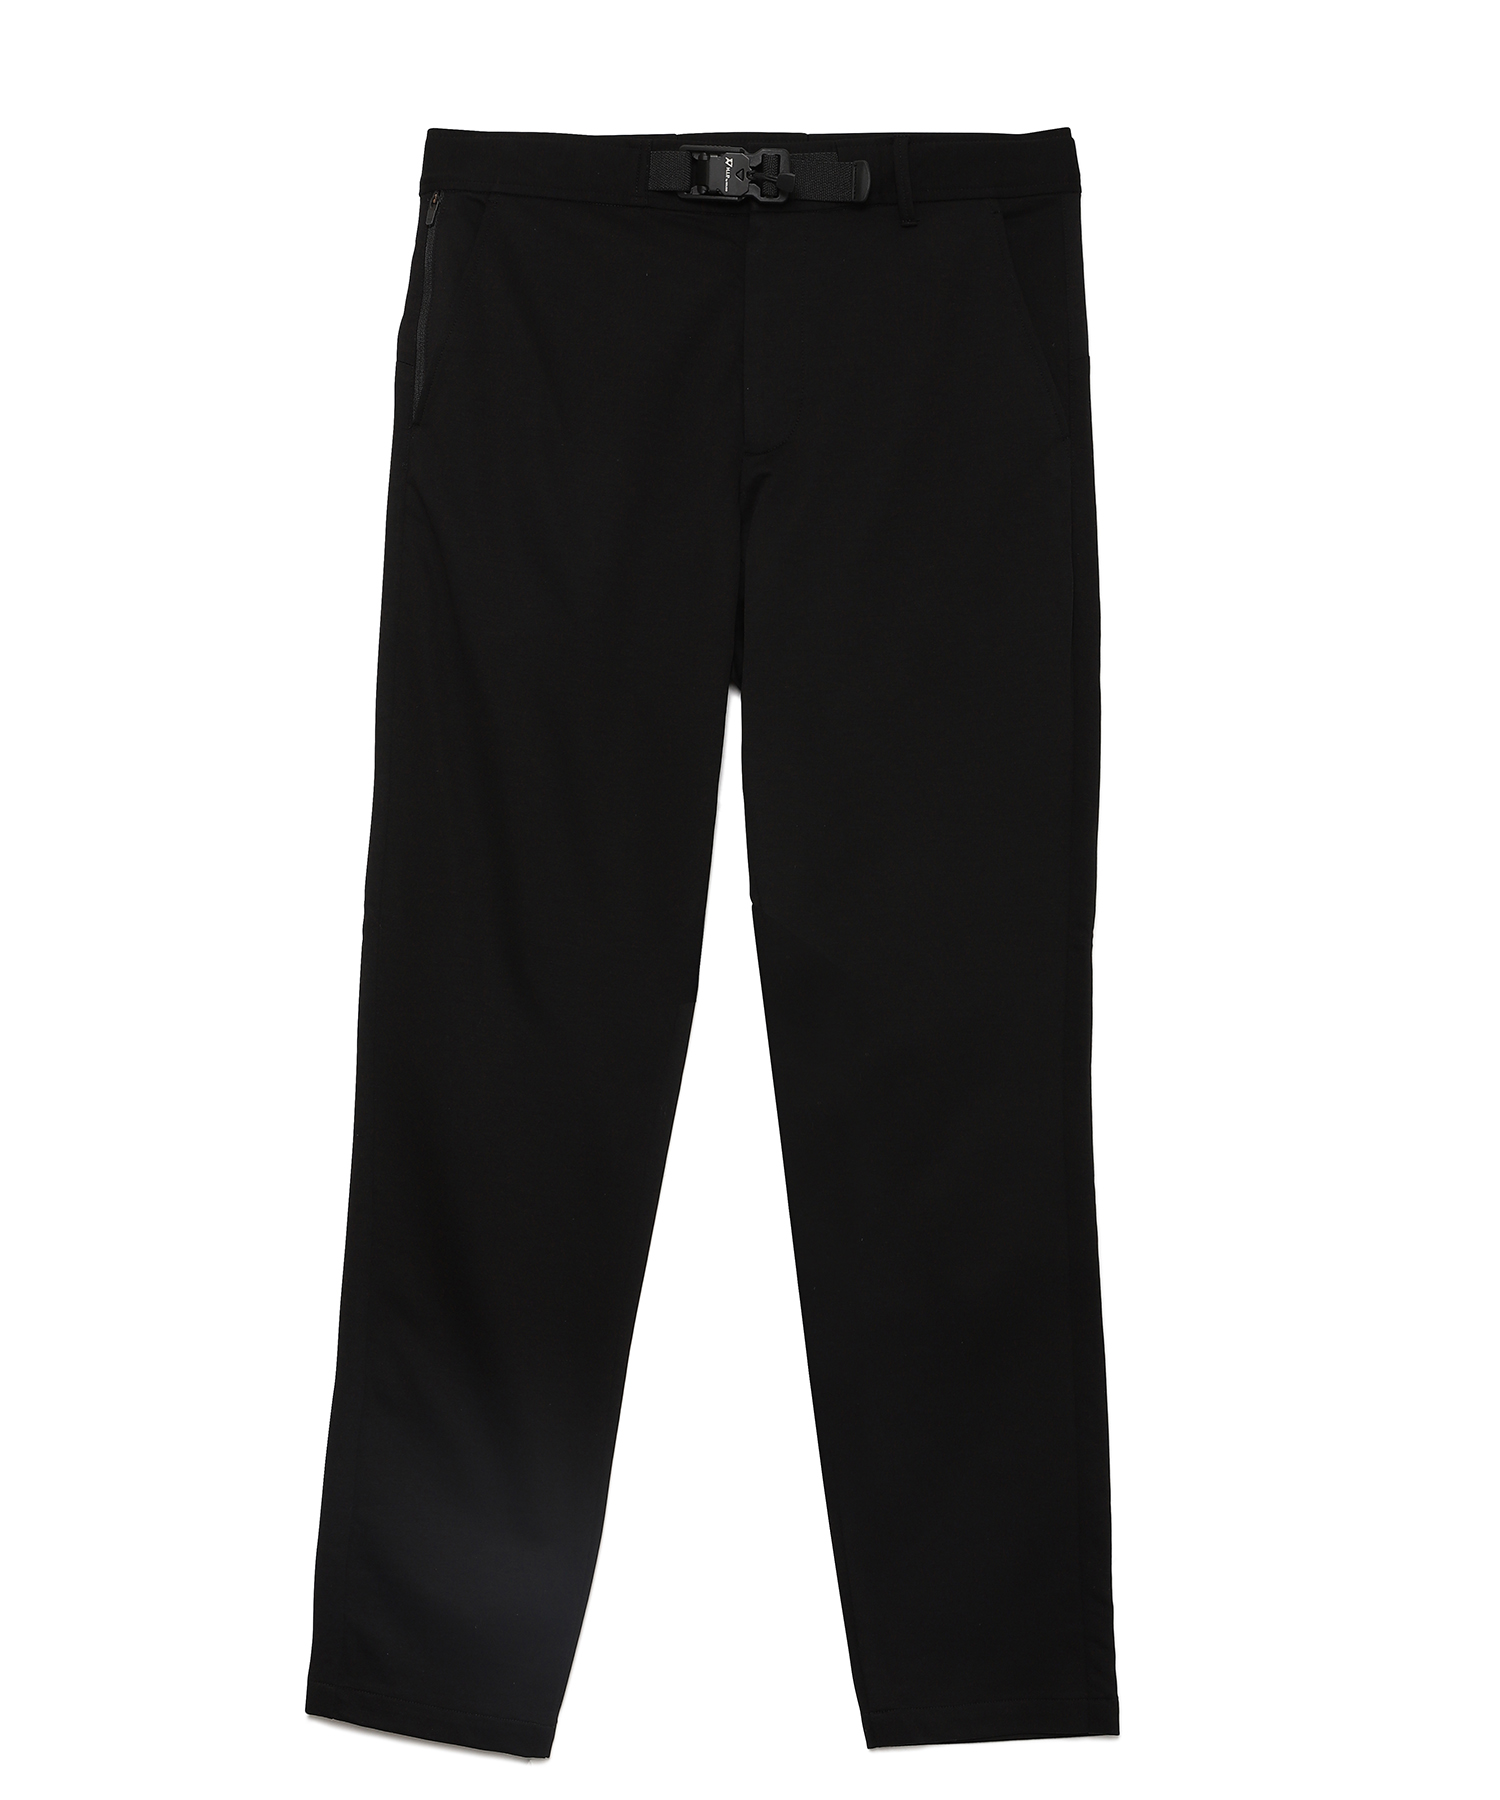 LIGHT WEIGHT DOZUME URAKE SLIM FIT TROUSERS（H.I.P. by SOLIDO